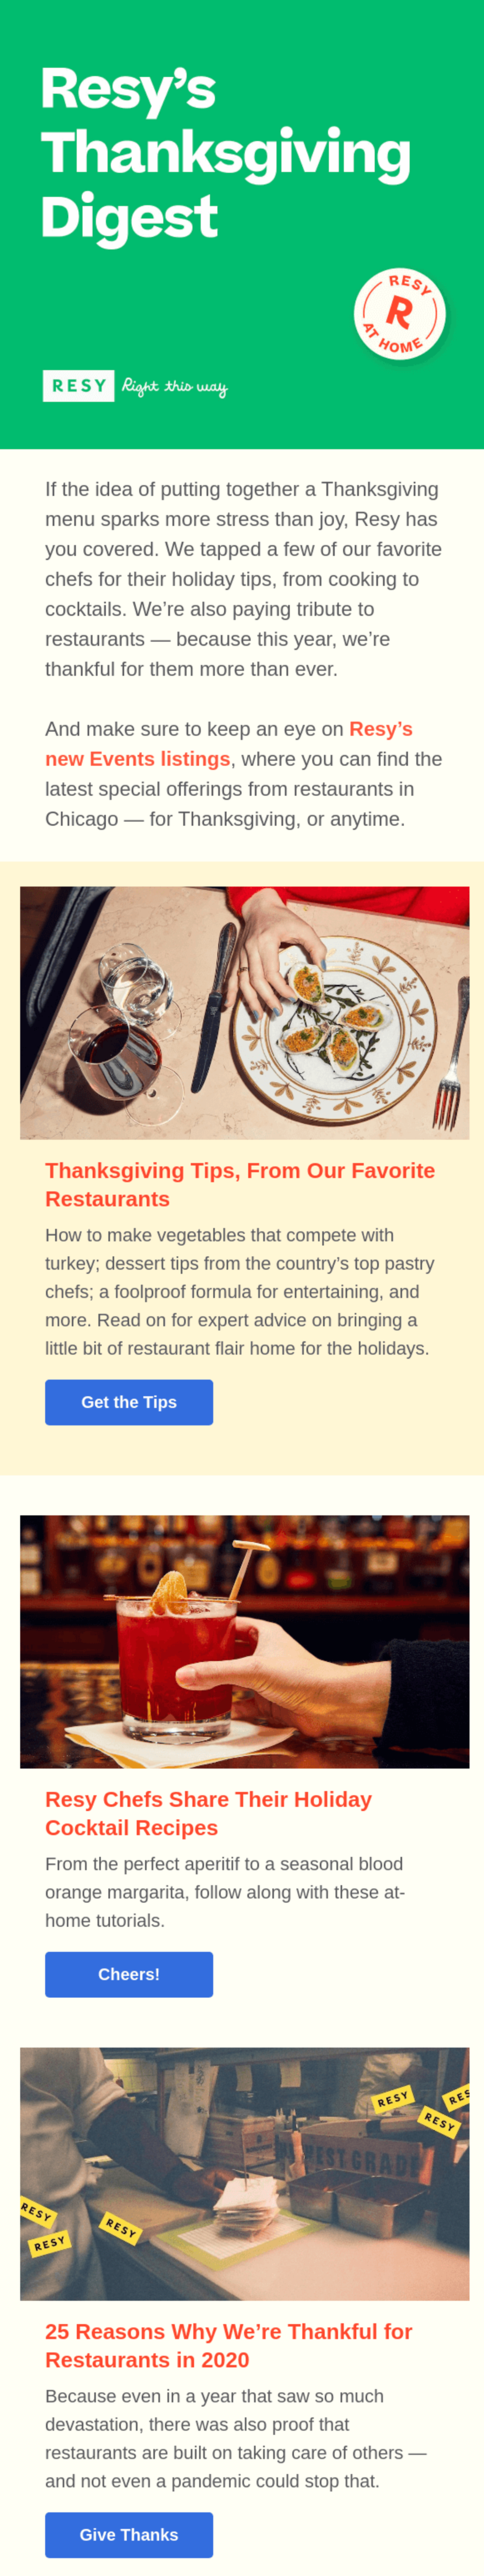 Resy uses geo-location in their thanksgiving campaign